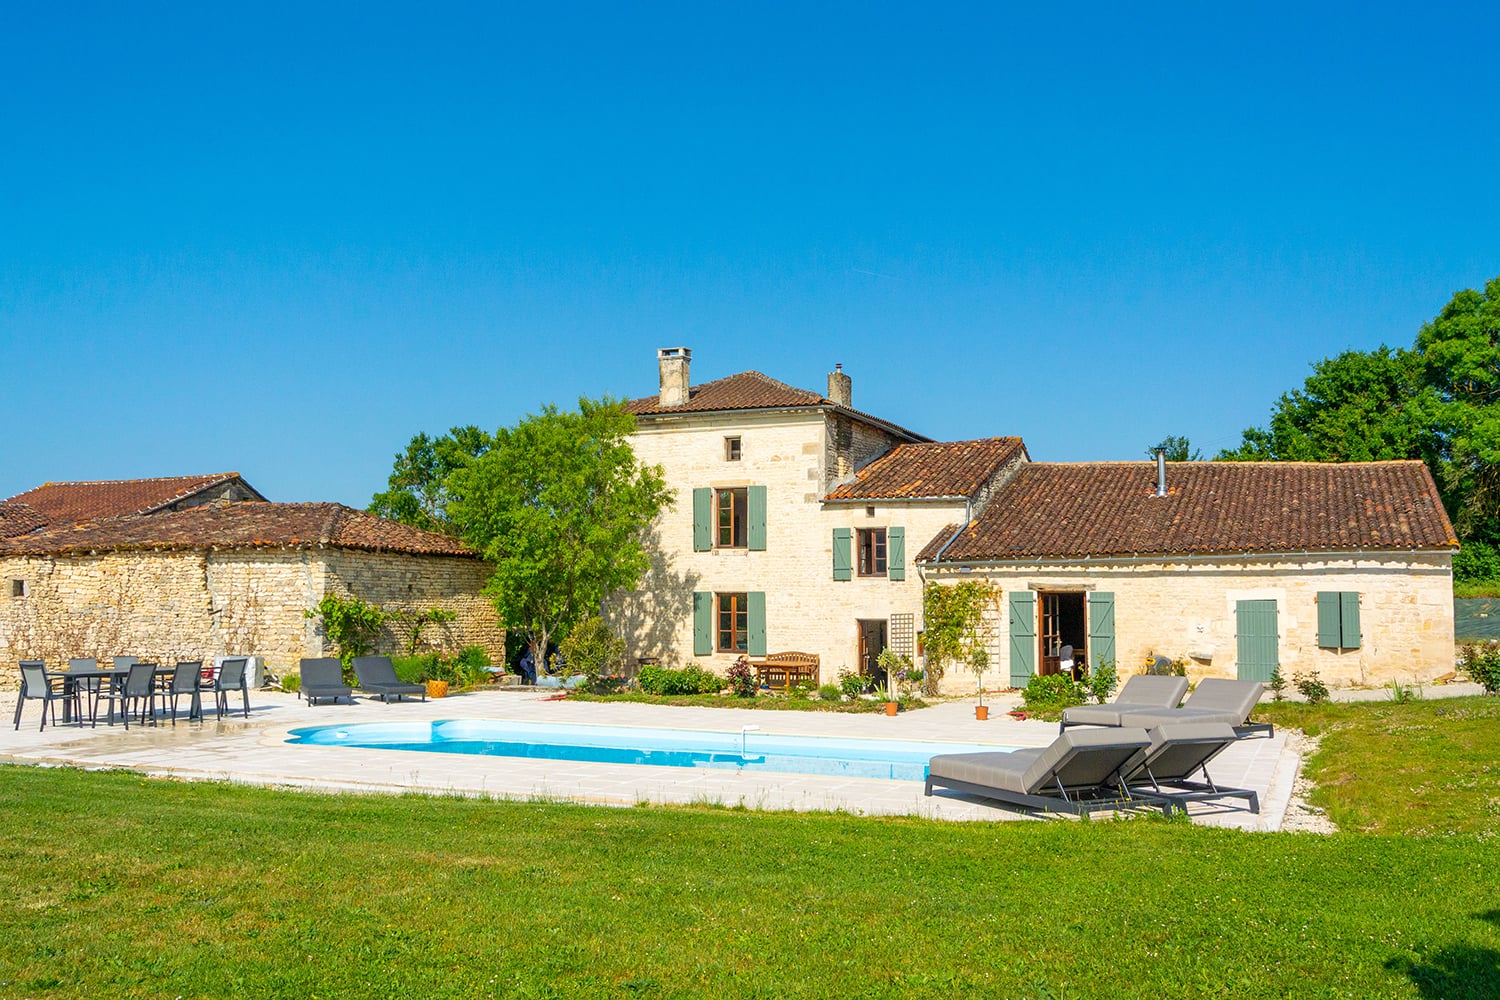 Holiday accommodation in Charente private heated pool